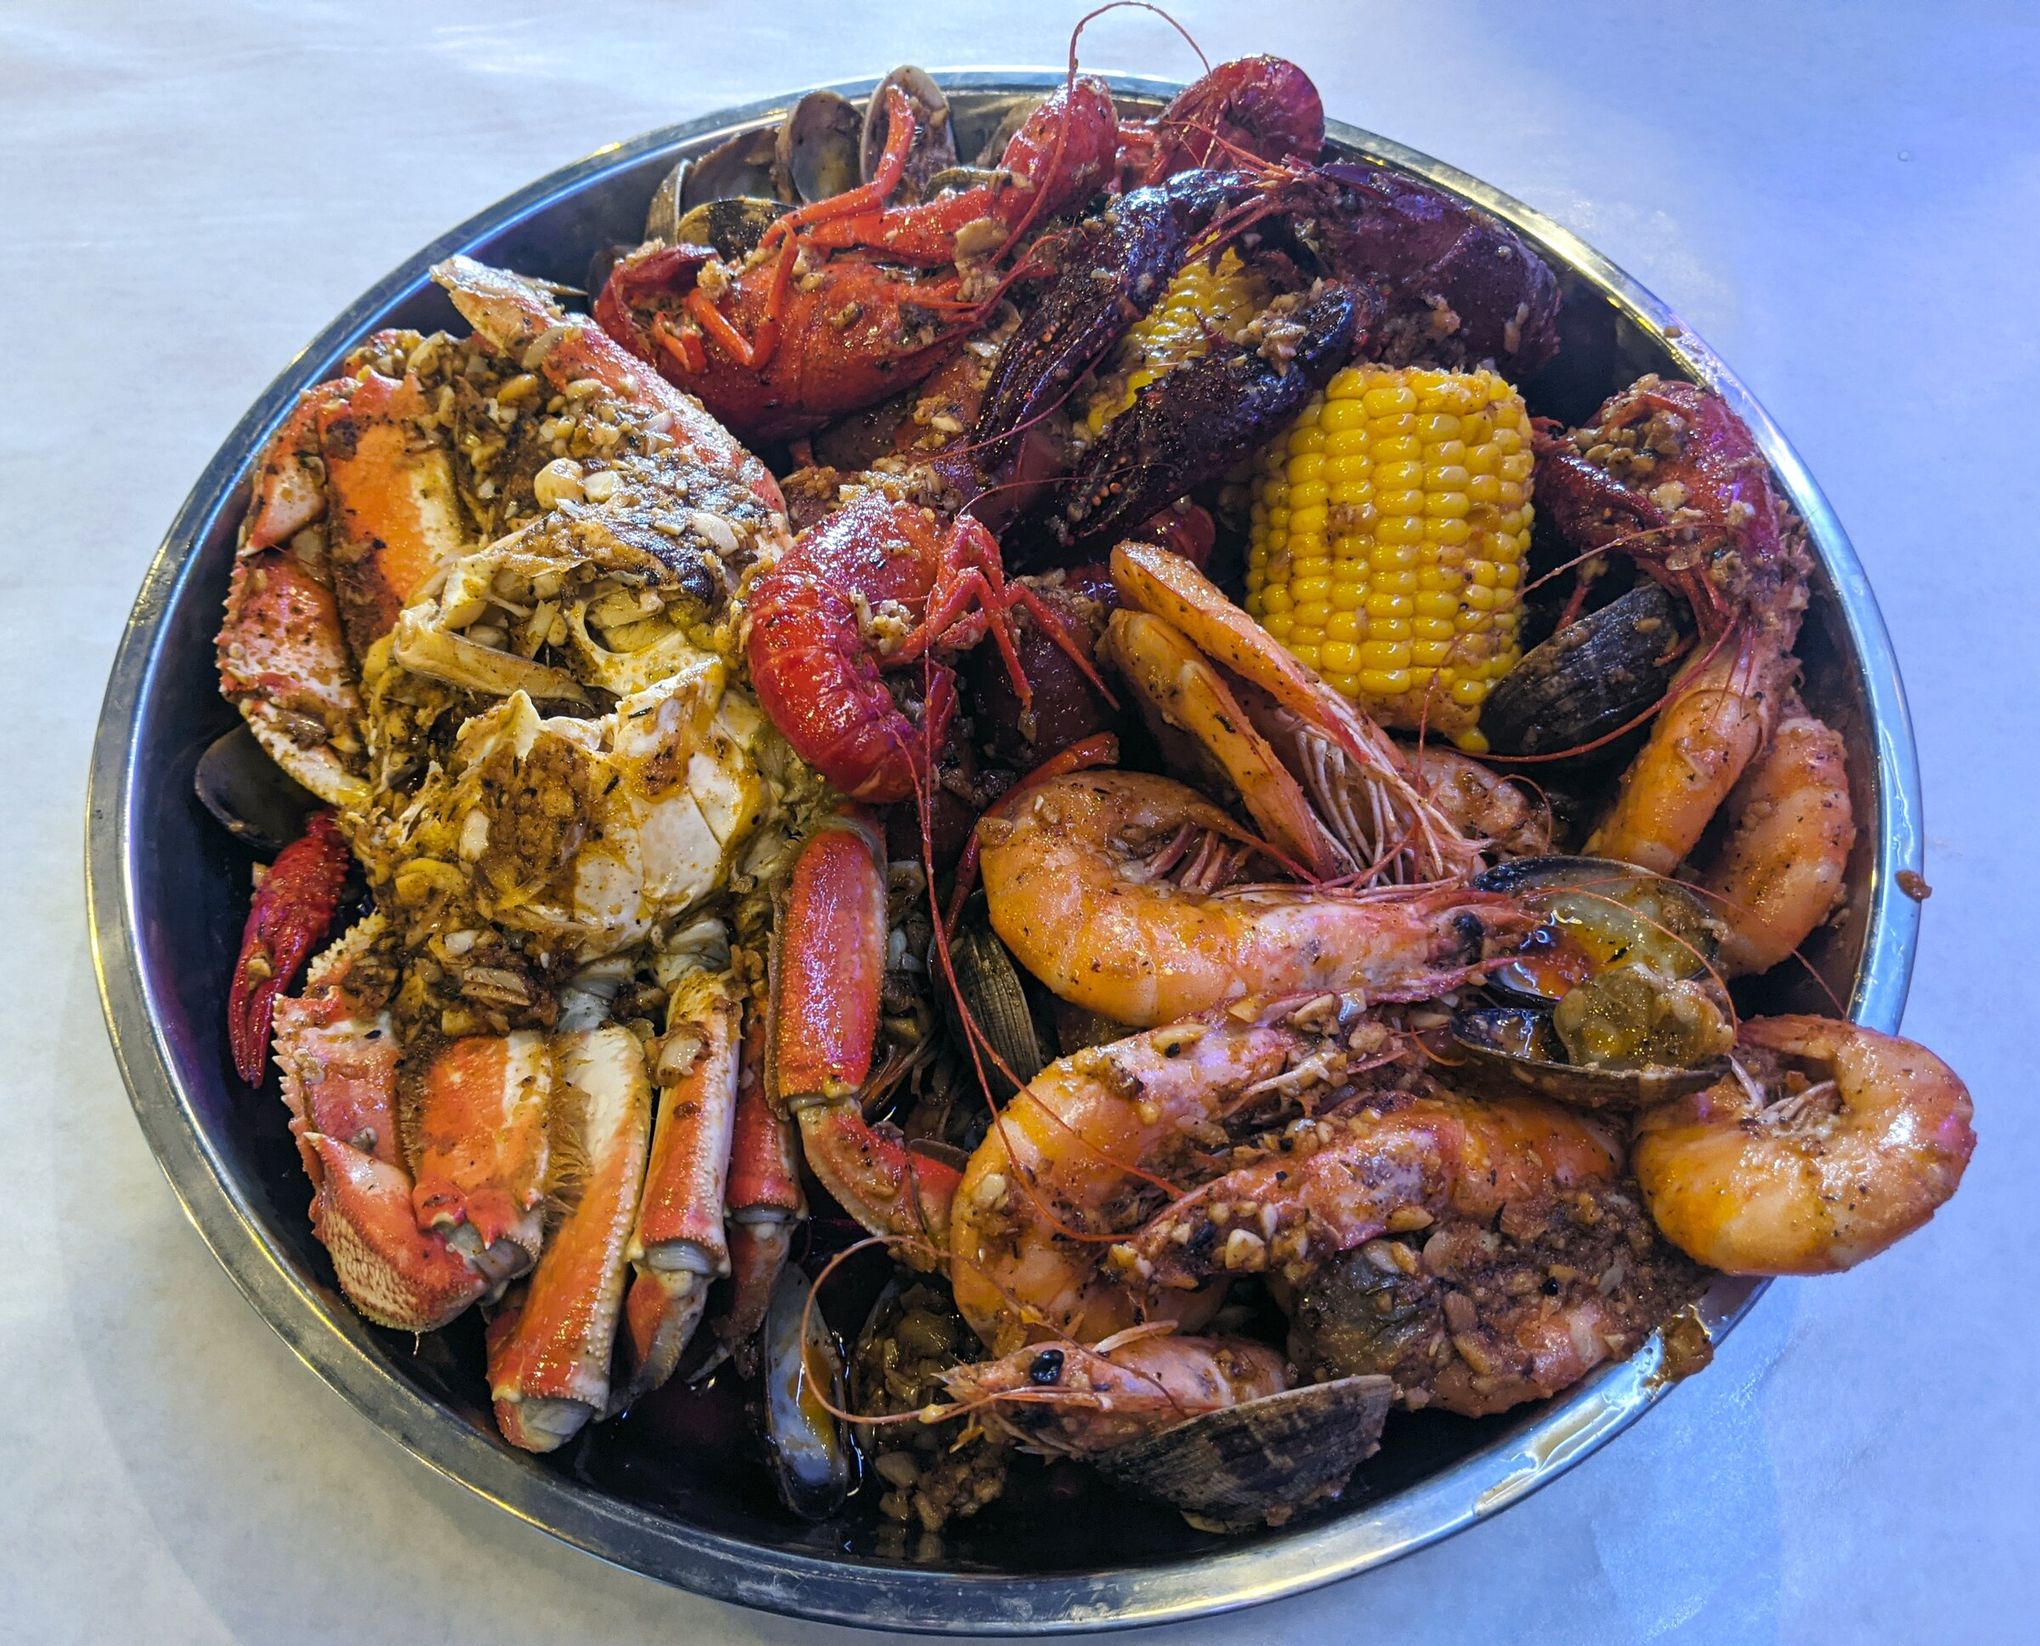 This Shoreline seafood boil will require both hands. It's worth